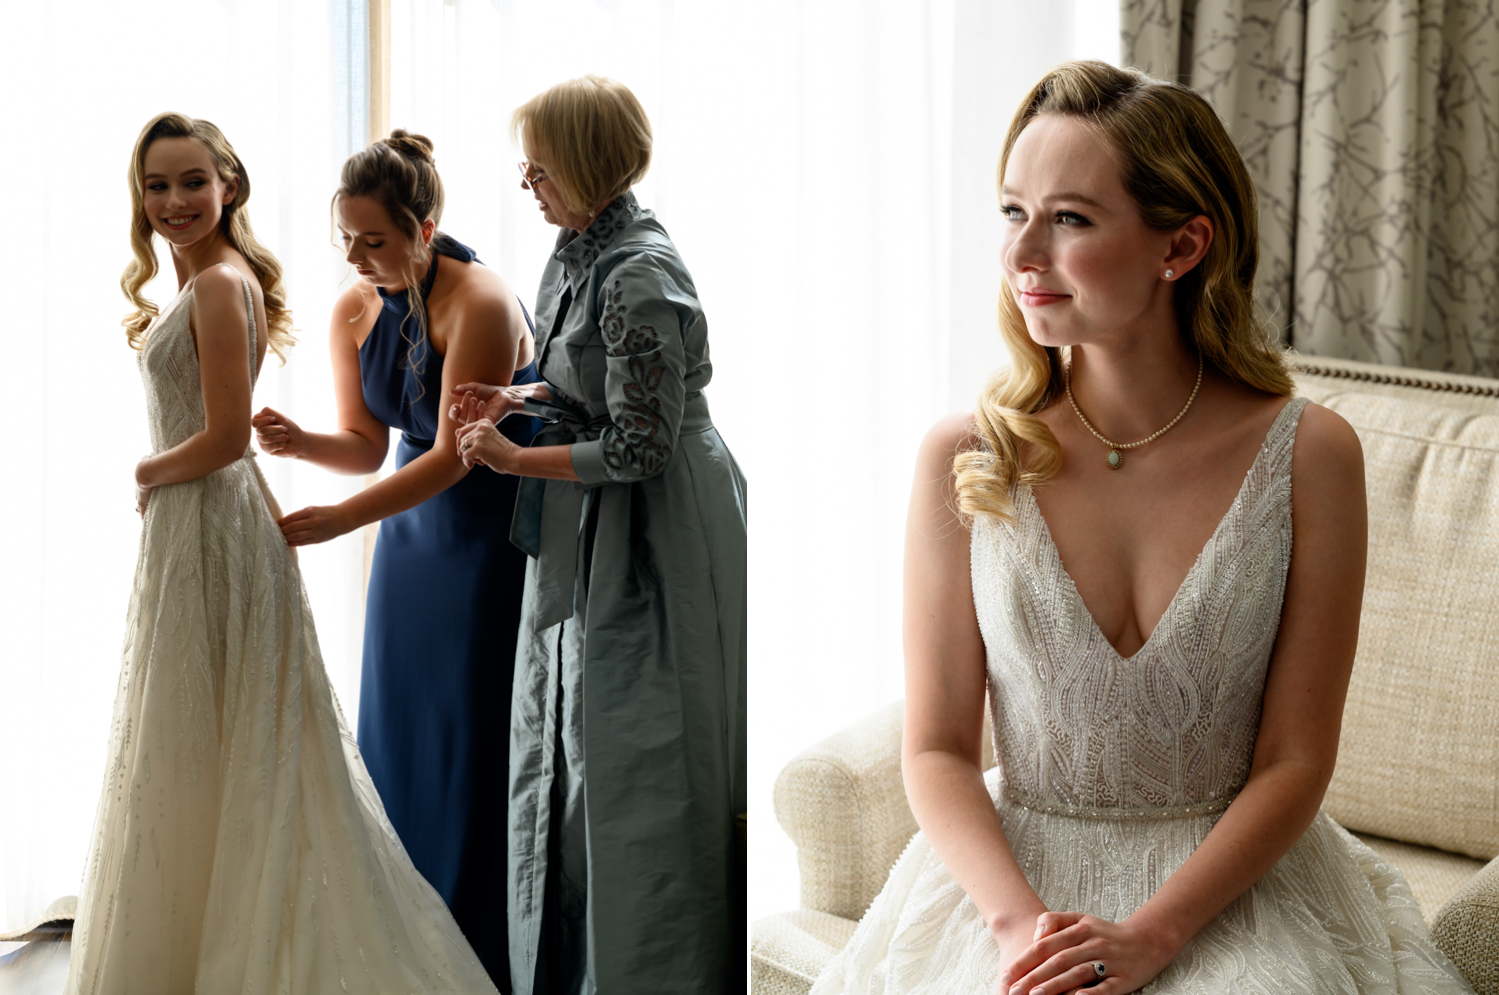 Left: The bride's mother and sister button up her dress. Right: A close up portrait of the bride sitting in front of a window.